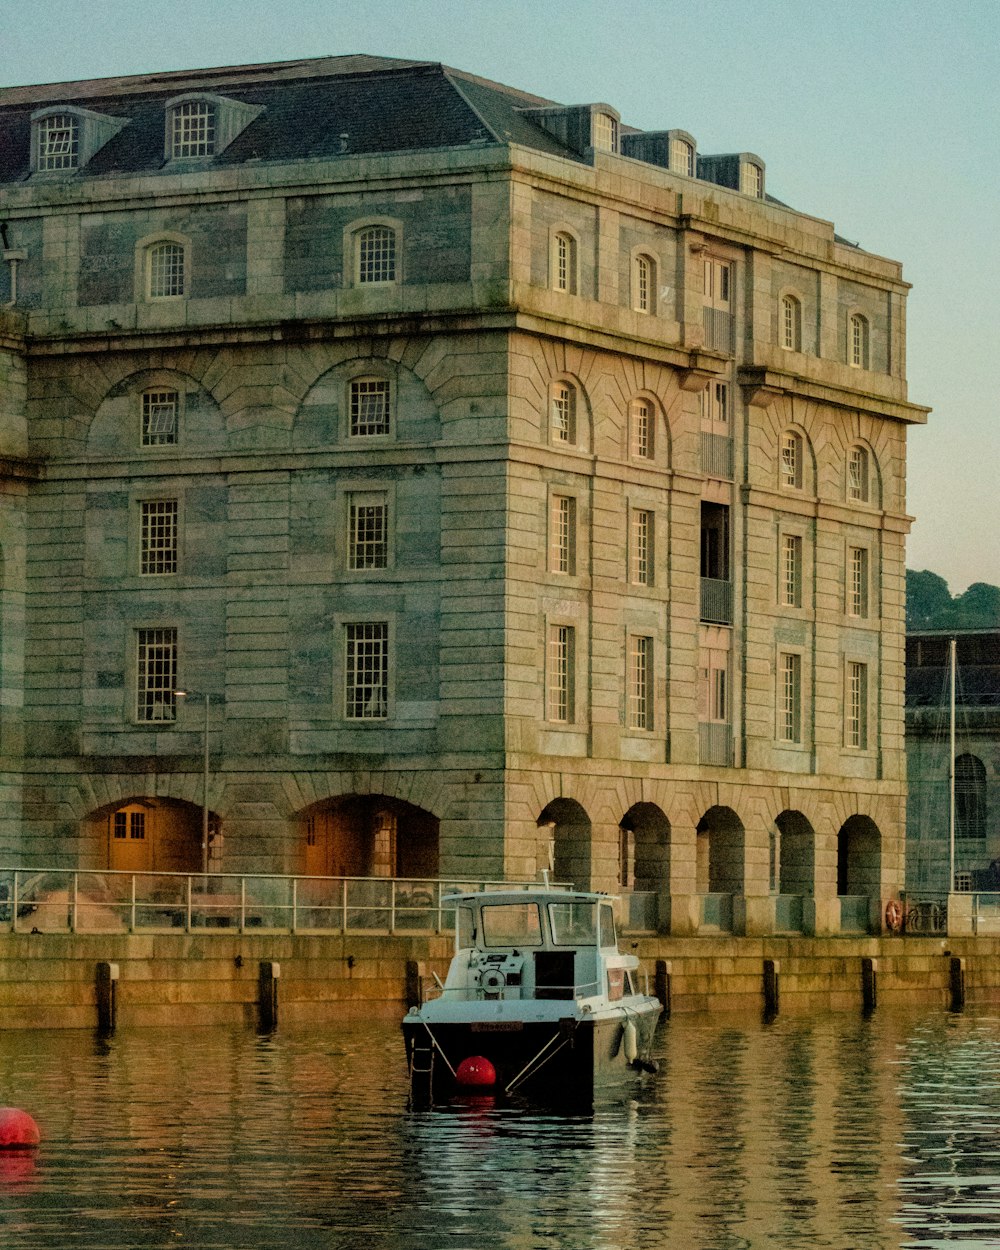 a boat in the water in front of a large building